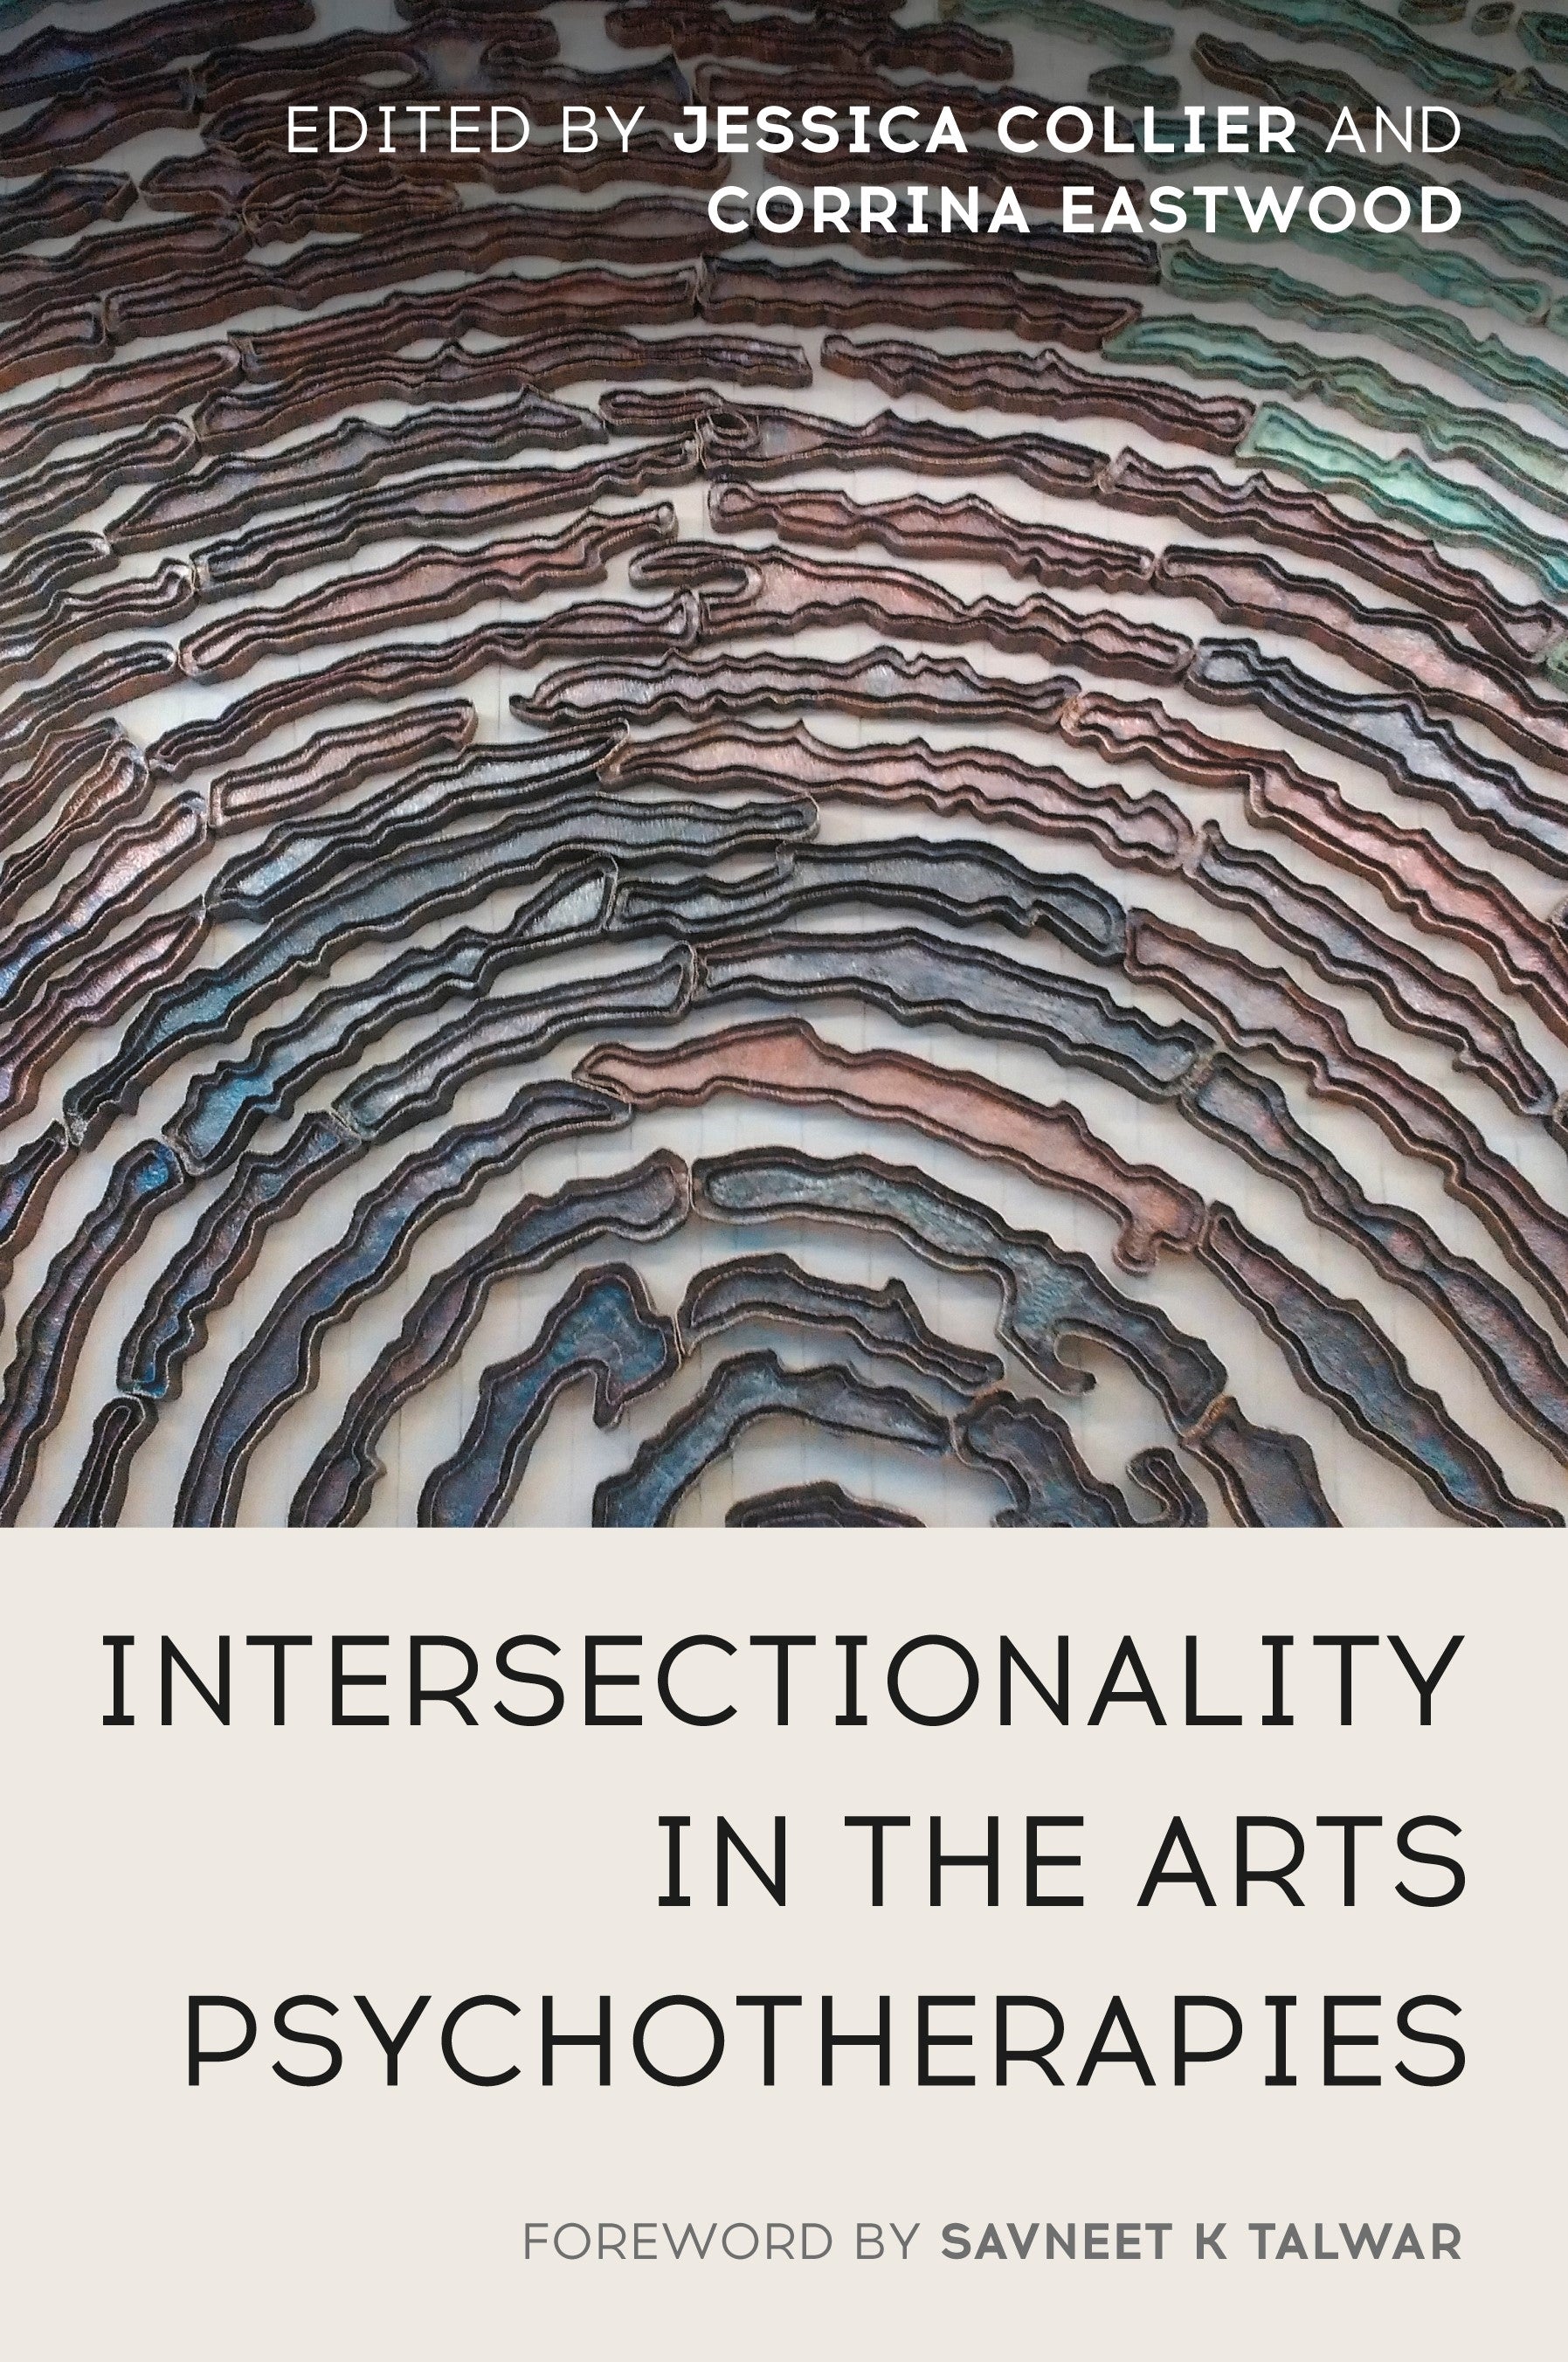 Intersectionality in the Arts Psychotherapies by Savneet K Talwar, Jessica Collier, Corrina Eastwood, No Author Listed